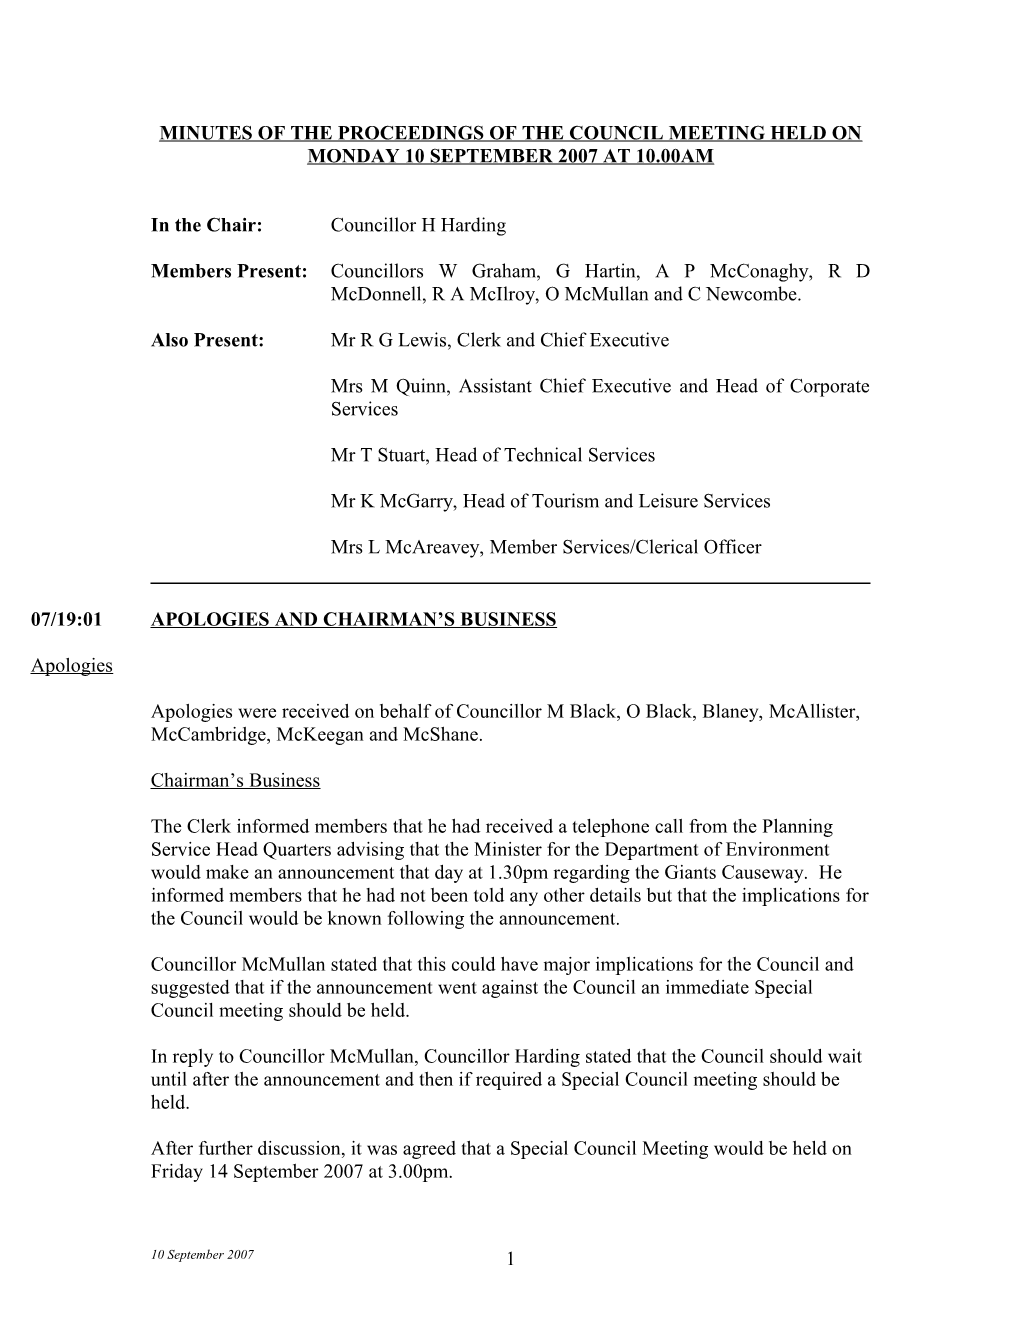 Minutes of the Proceedings of the Council Meeting Held on Monday 13 February 2006 at 10